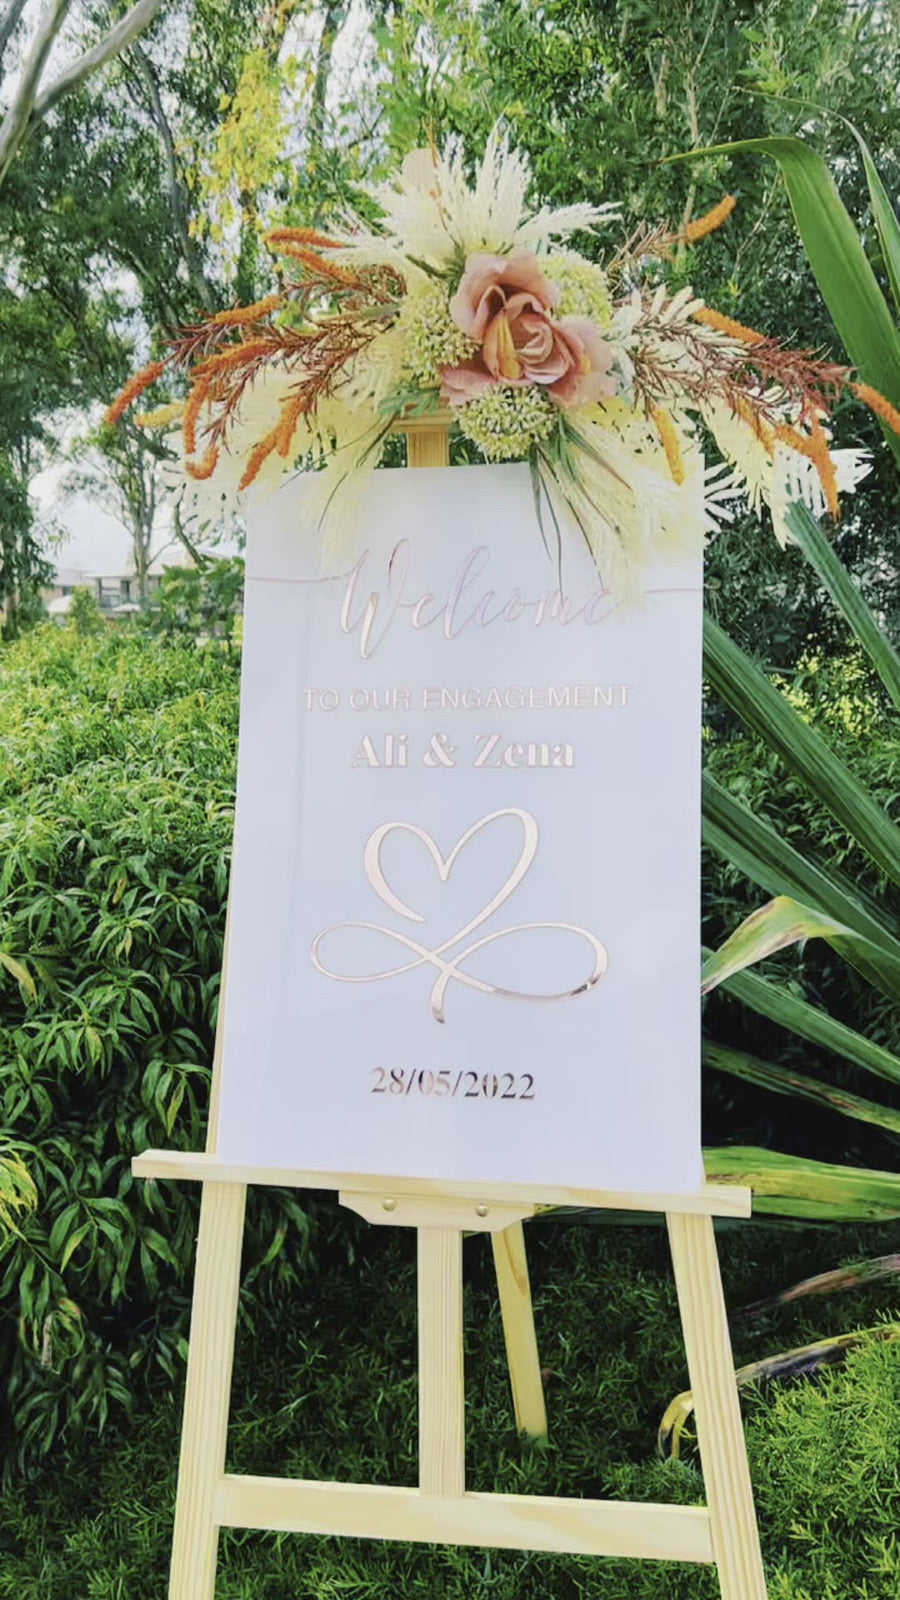 Acrylic 3D Welcome Wedding Vertical Signage - Style 5